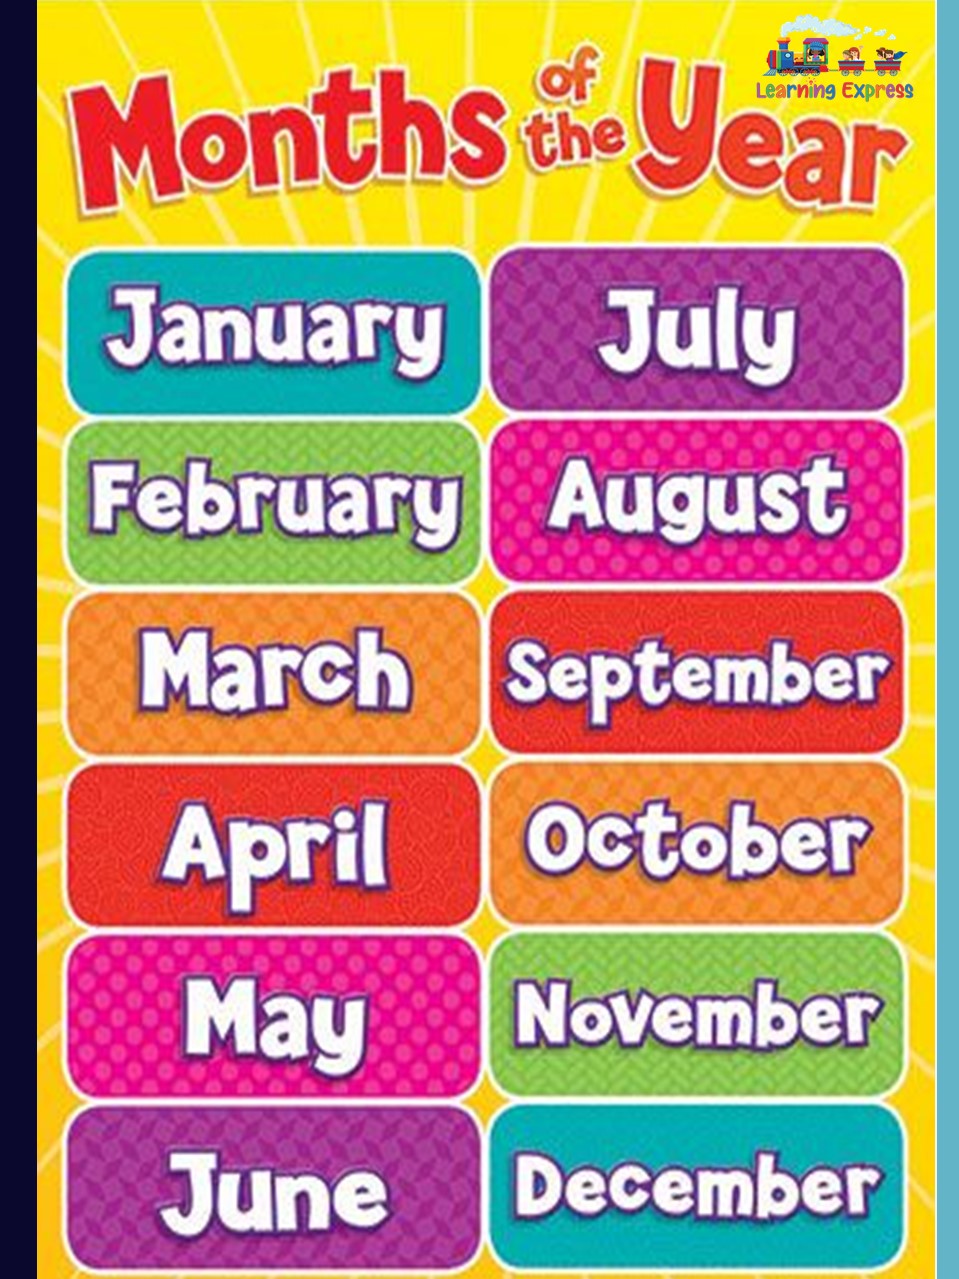 Month of the year Poster